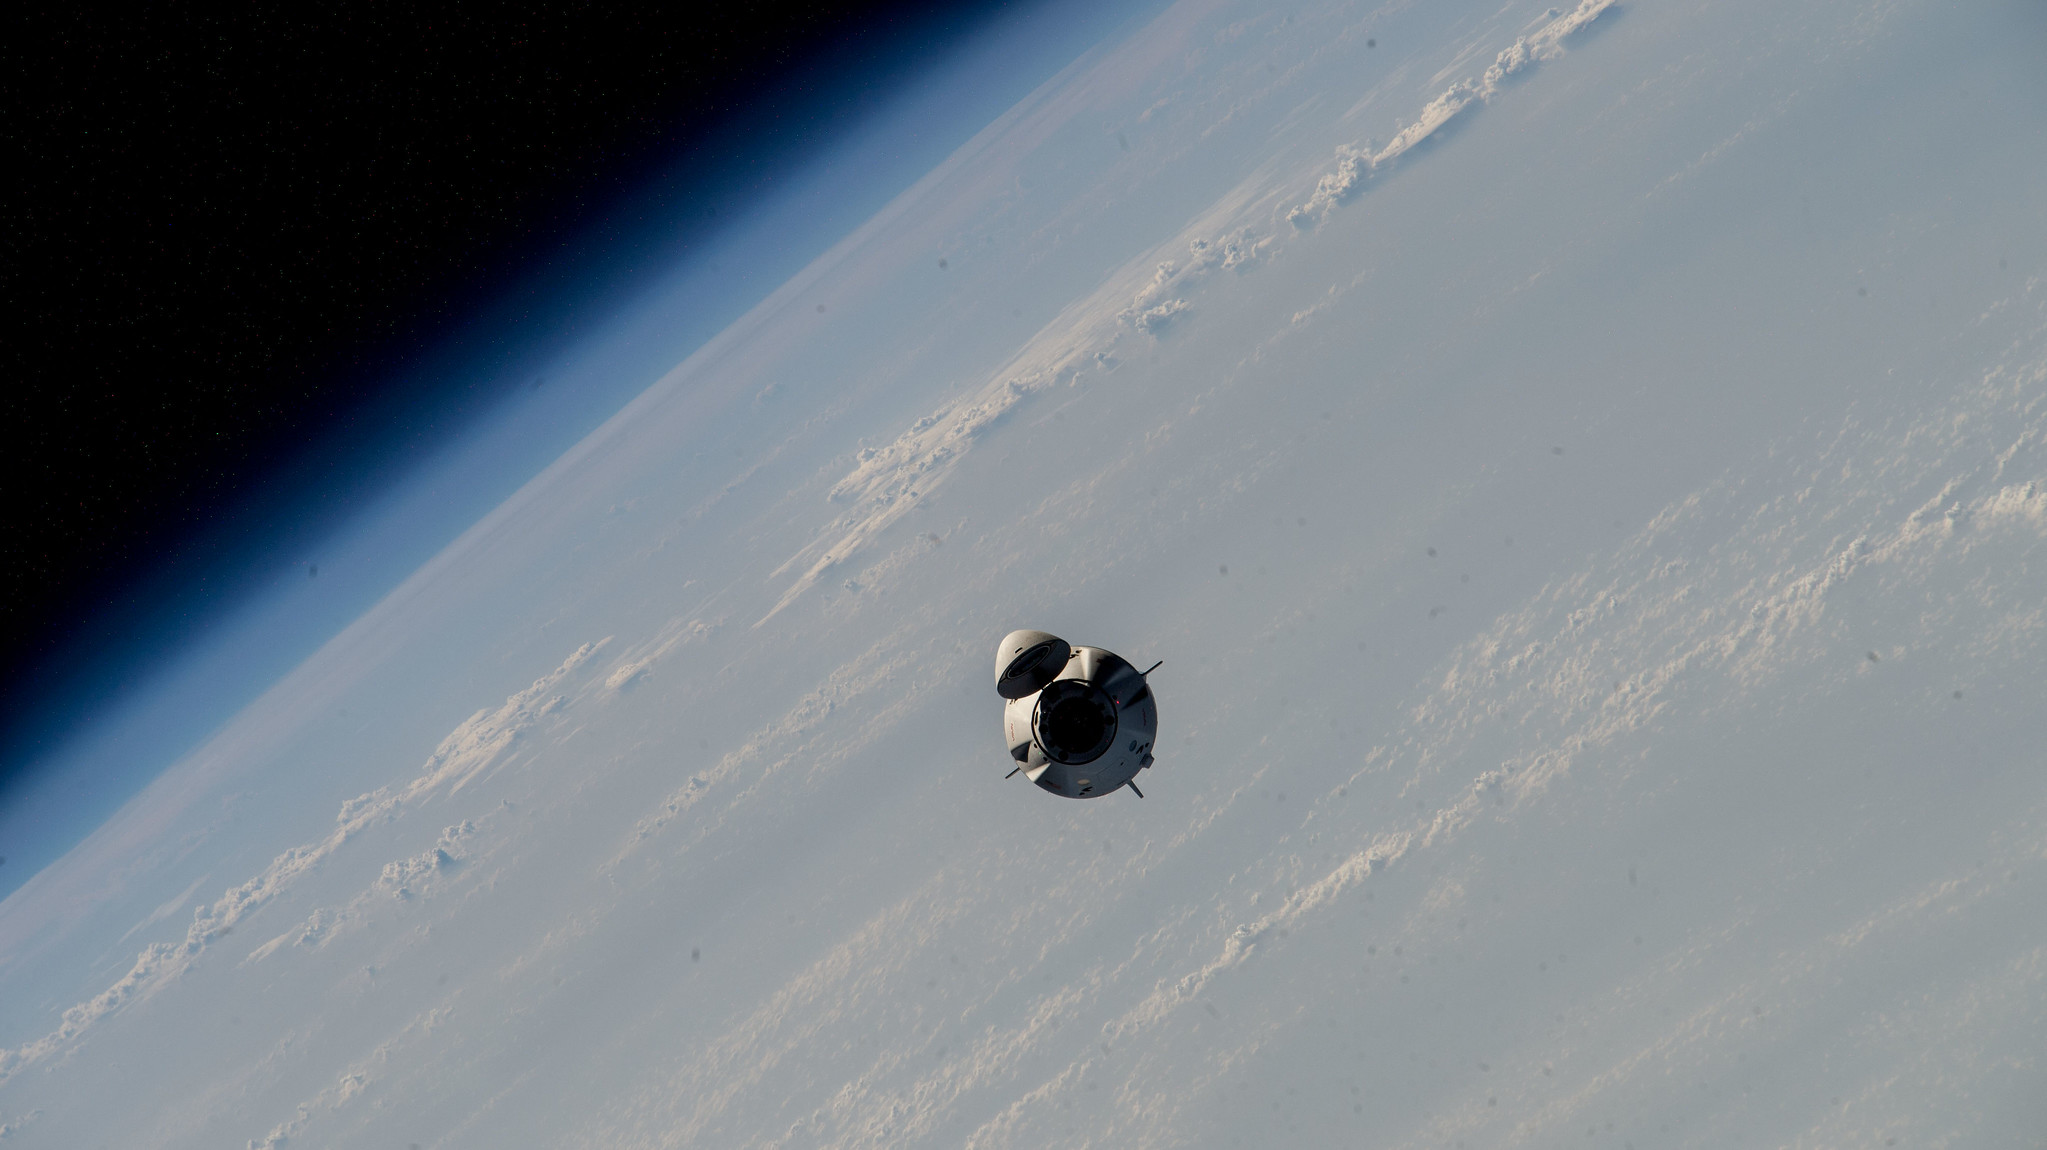 The SpaceX Crew Dragon Endeavour approaches the International Space Station carrying astronauts Stephen Bowen and Woody Hoburg of NASA, Sultan Alneyadi from UAE (United Arab Emirates), and Andrey Fedyaev from Roscosmos.